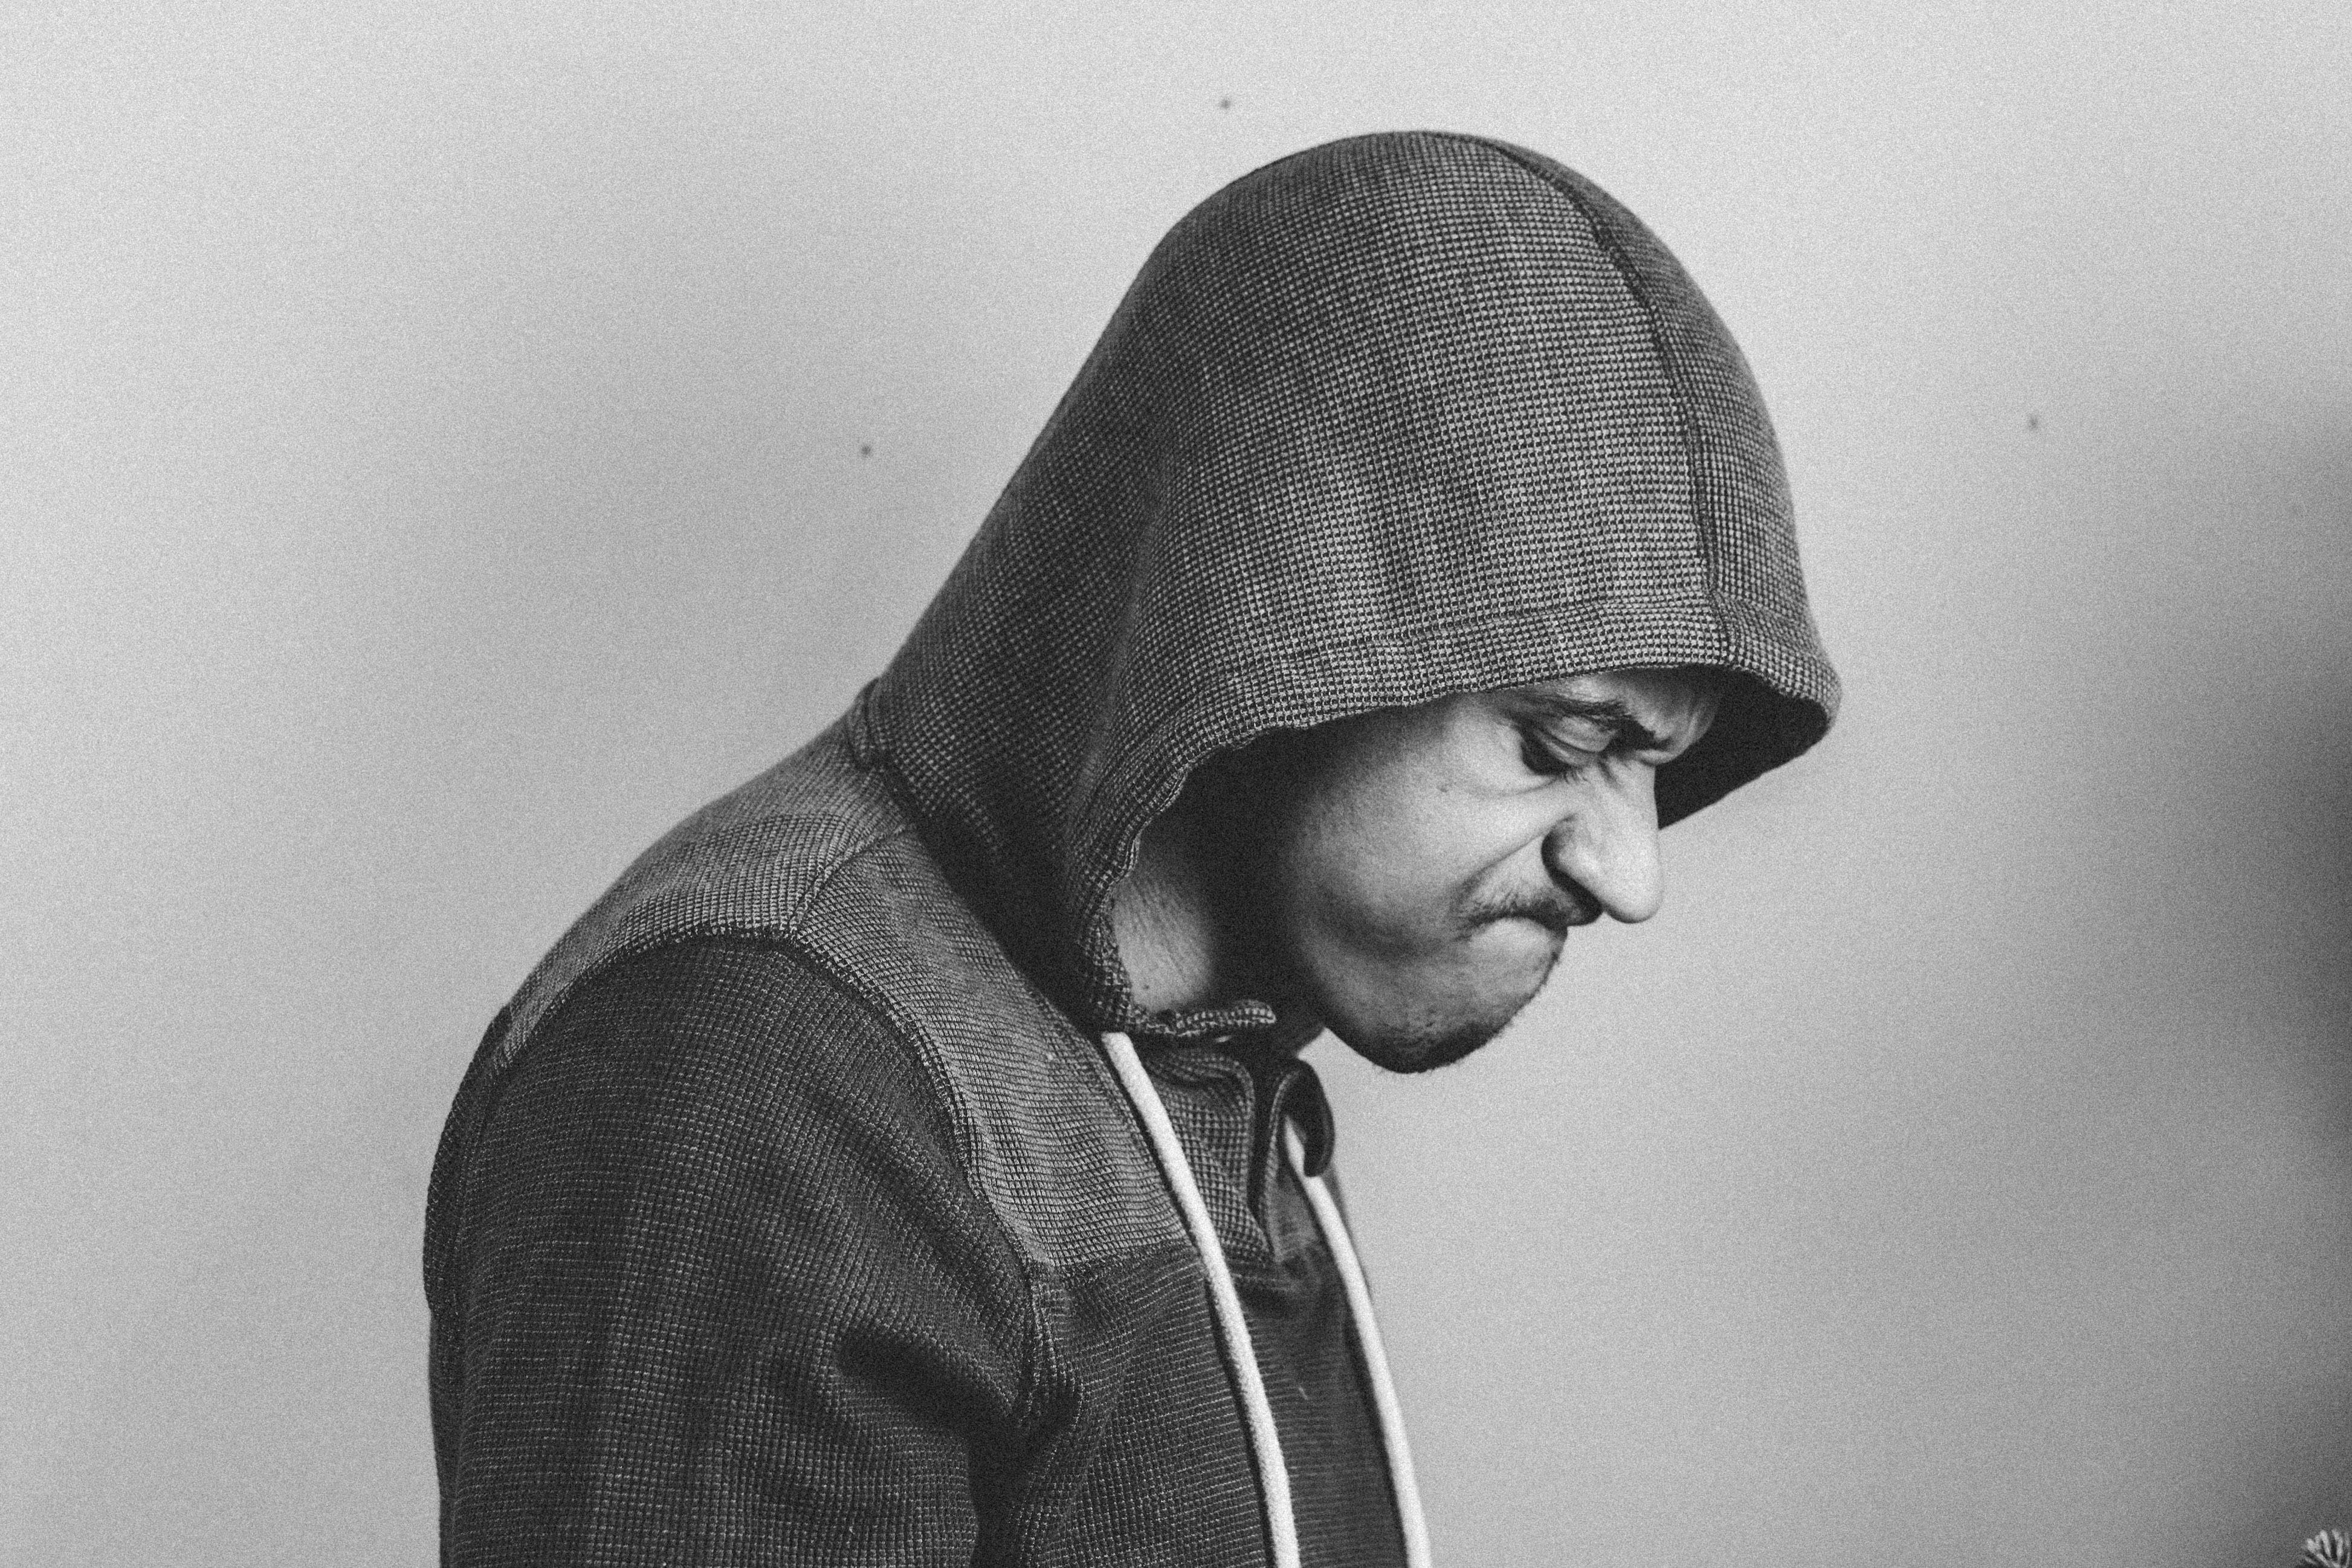 An angry man wearing a hoodie and looking down | Source: Pexels